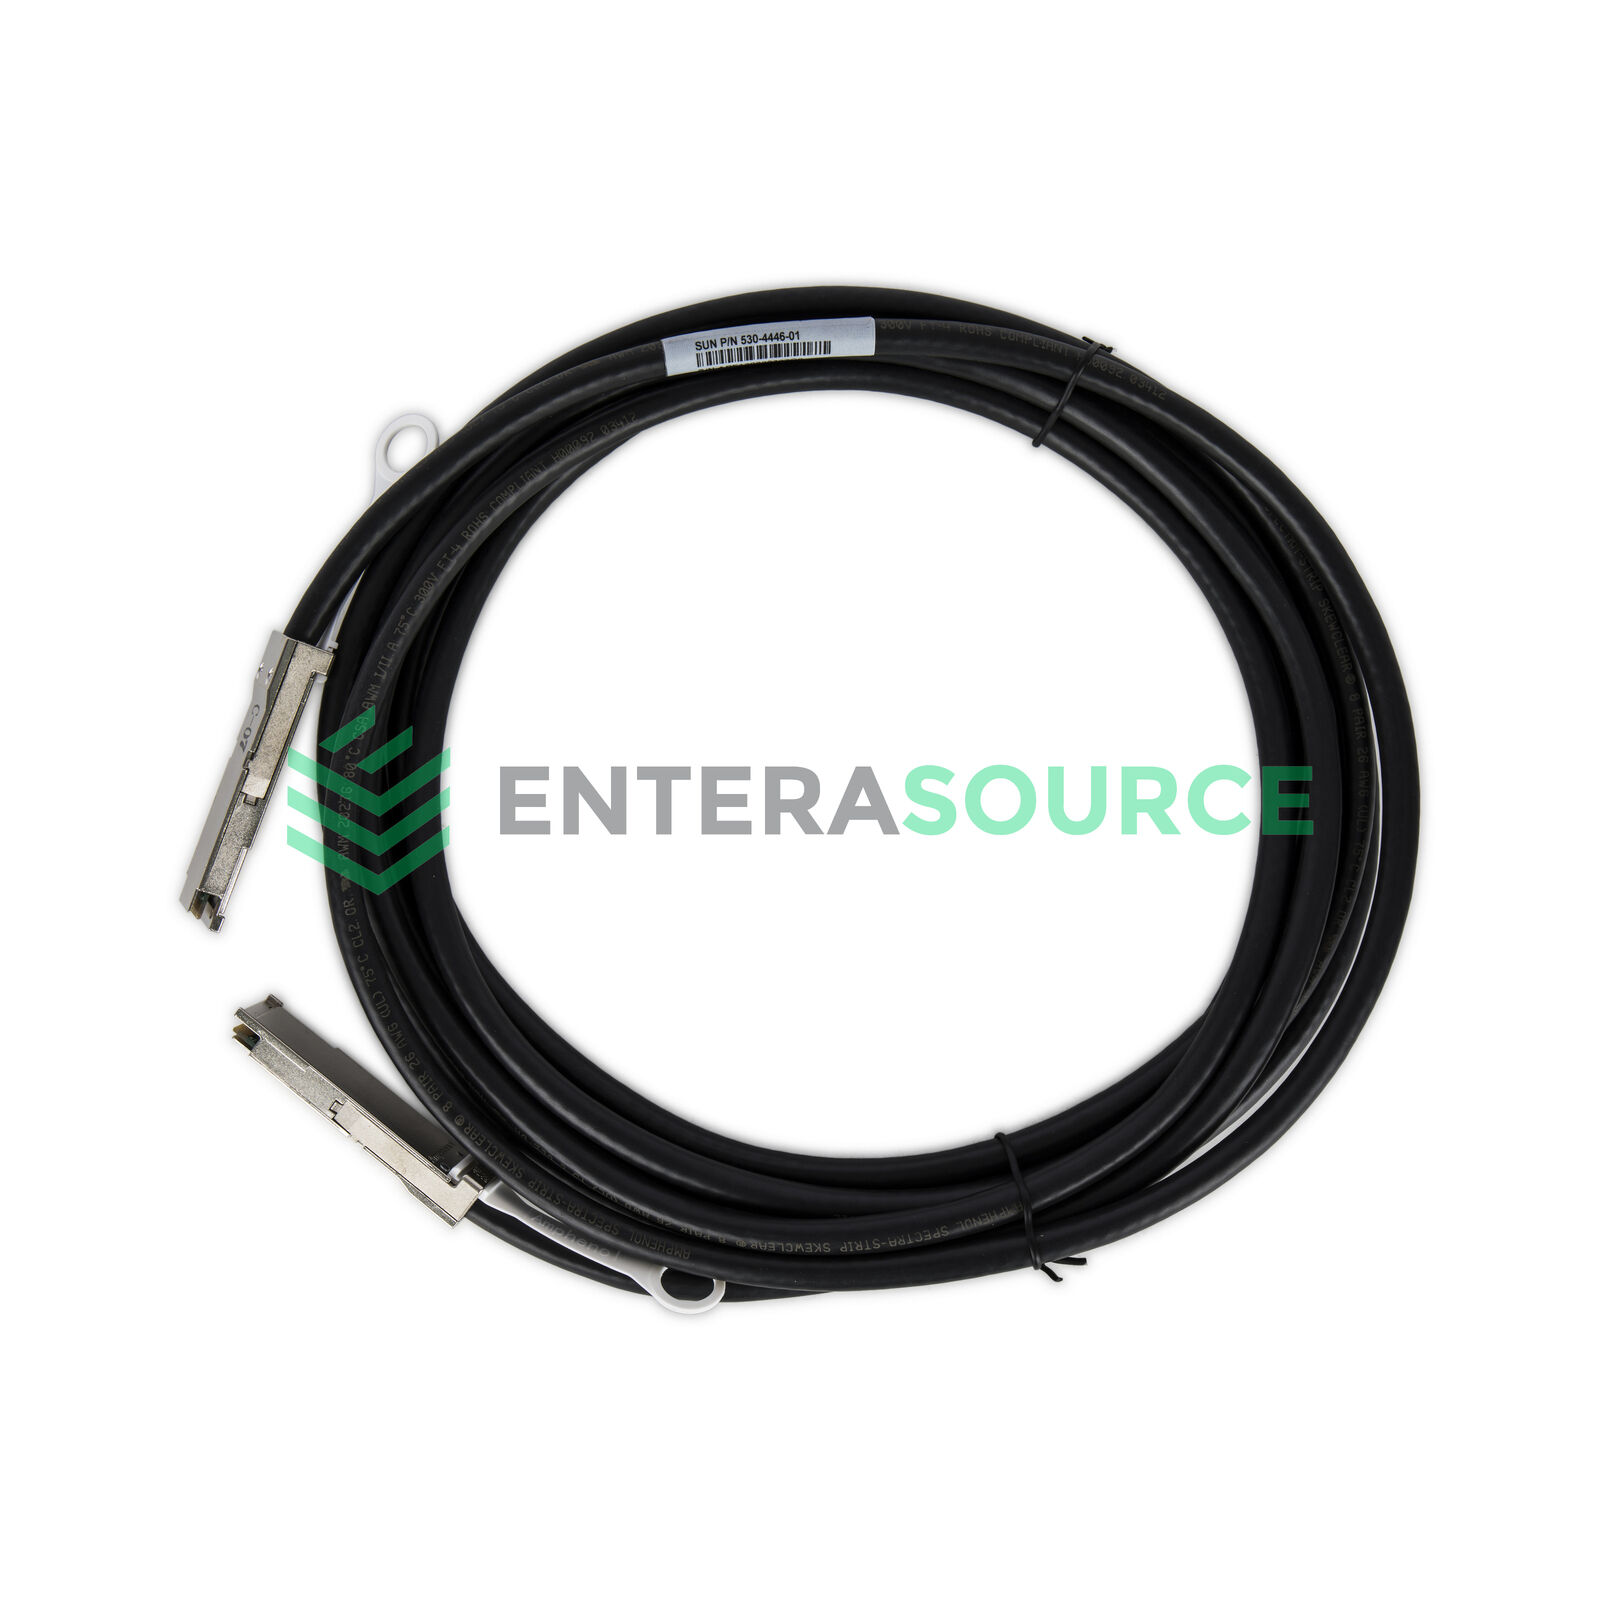 Sun 530-4446-01 Infiniband 5M QSFP to QSFP Passive Copper Cable